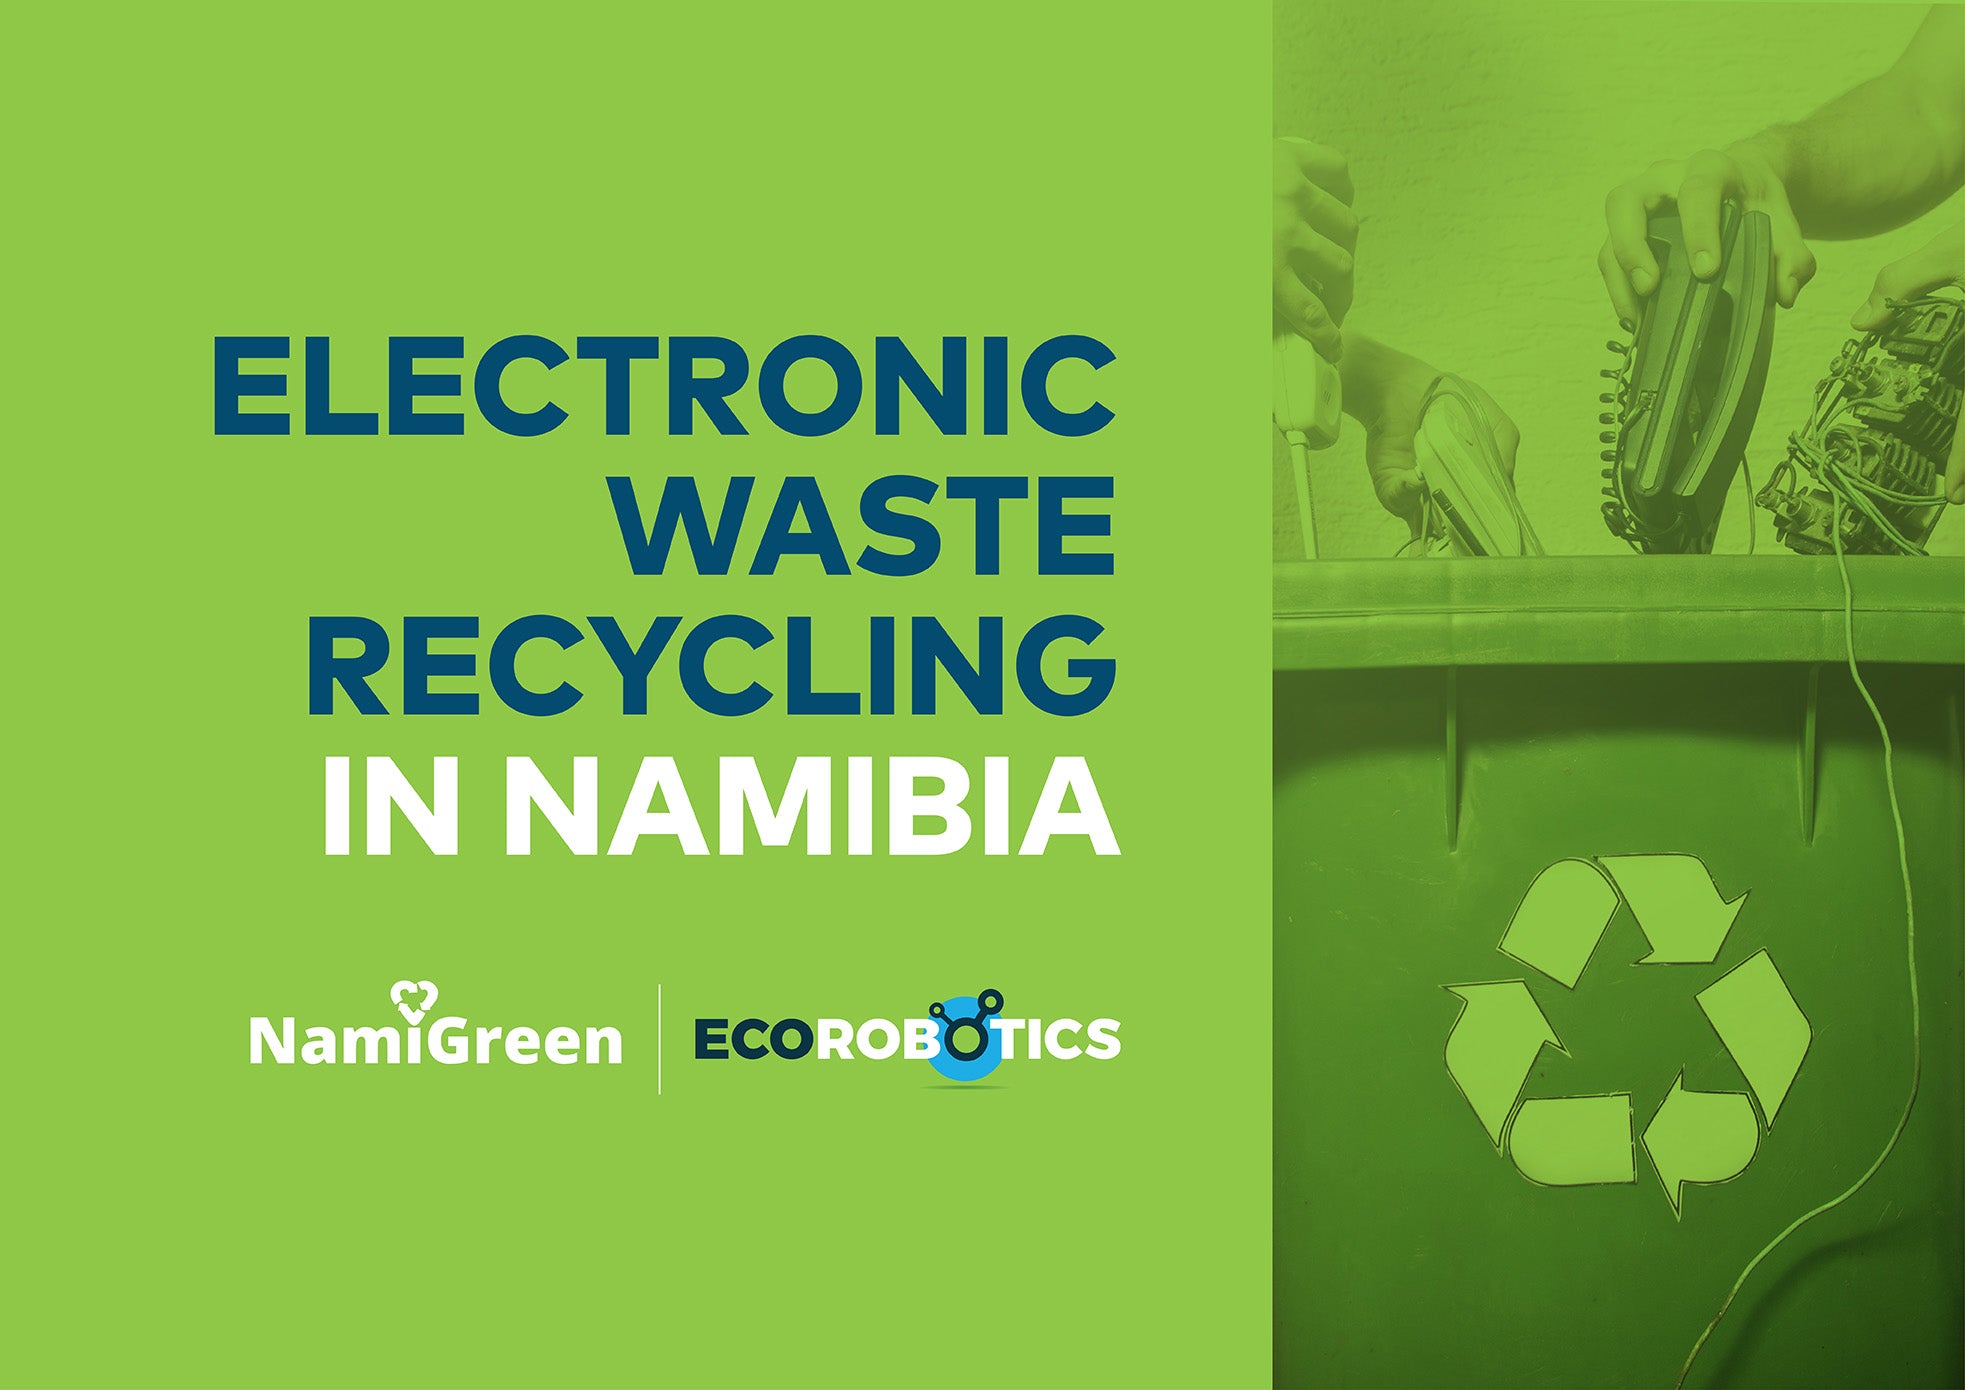 ELECTRONIC WASTE (E-WASTE) RECYCLING IN NAMIBIA